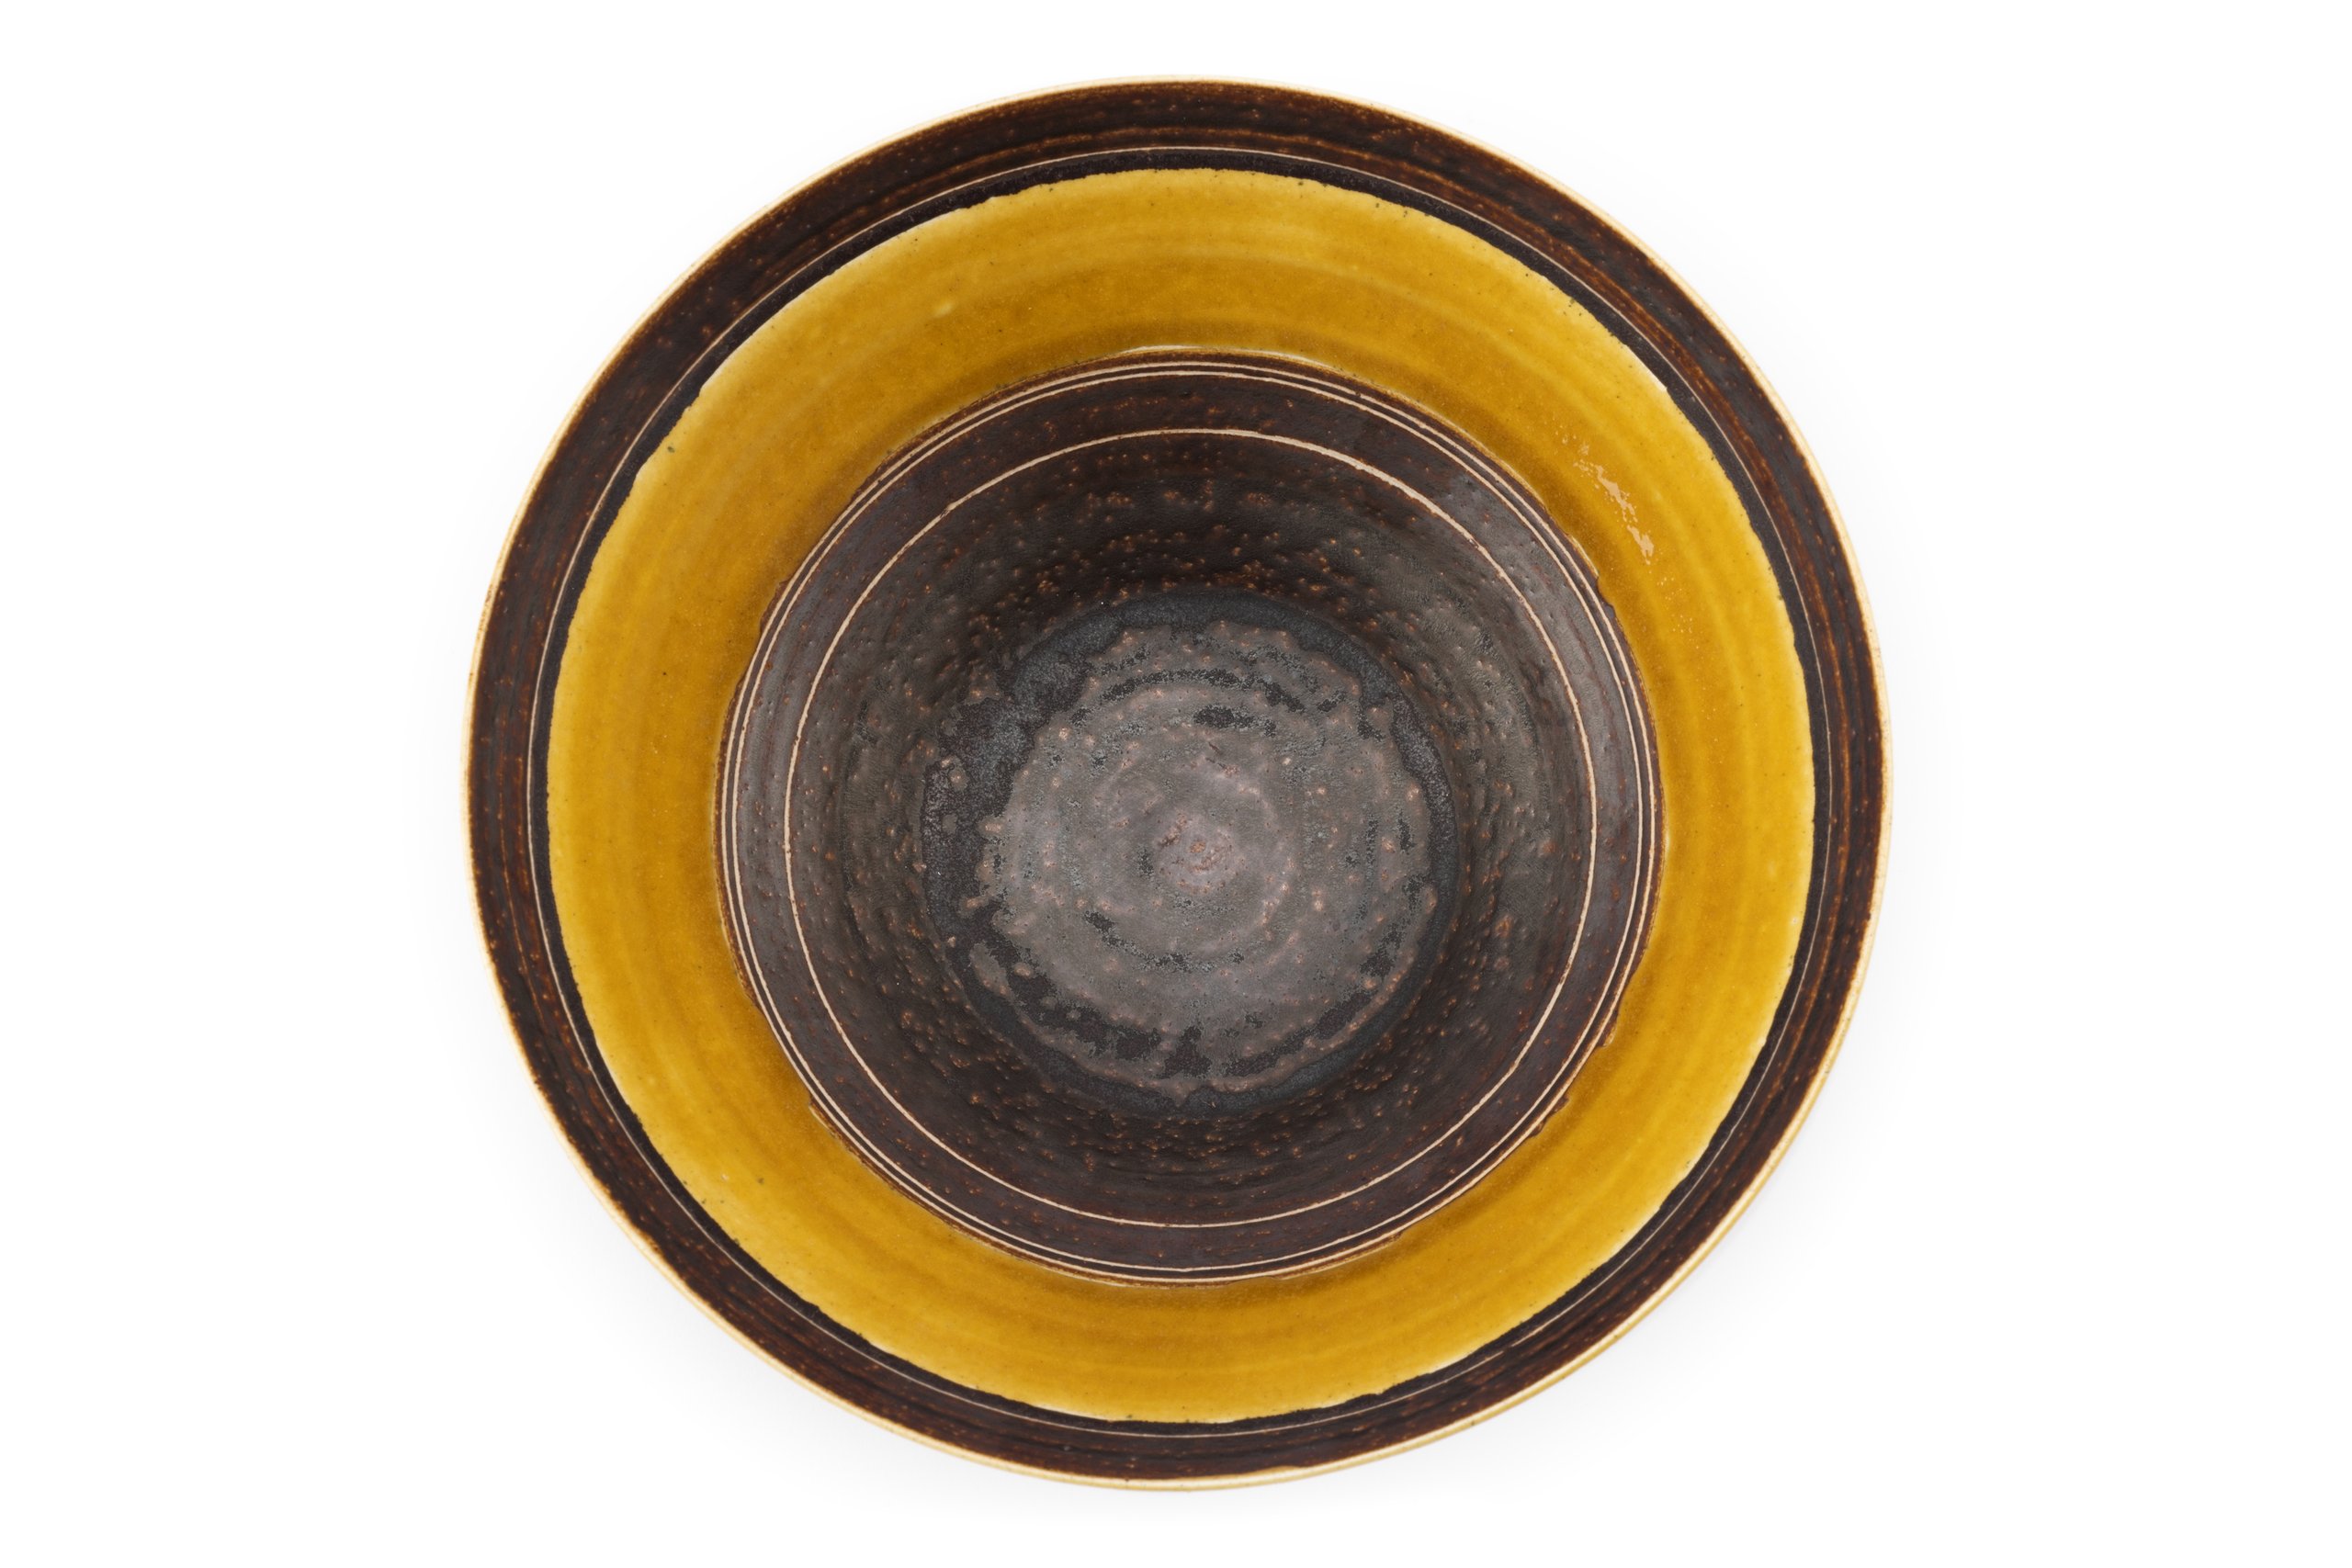 Porcelain bowl by Lucie Rie